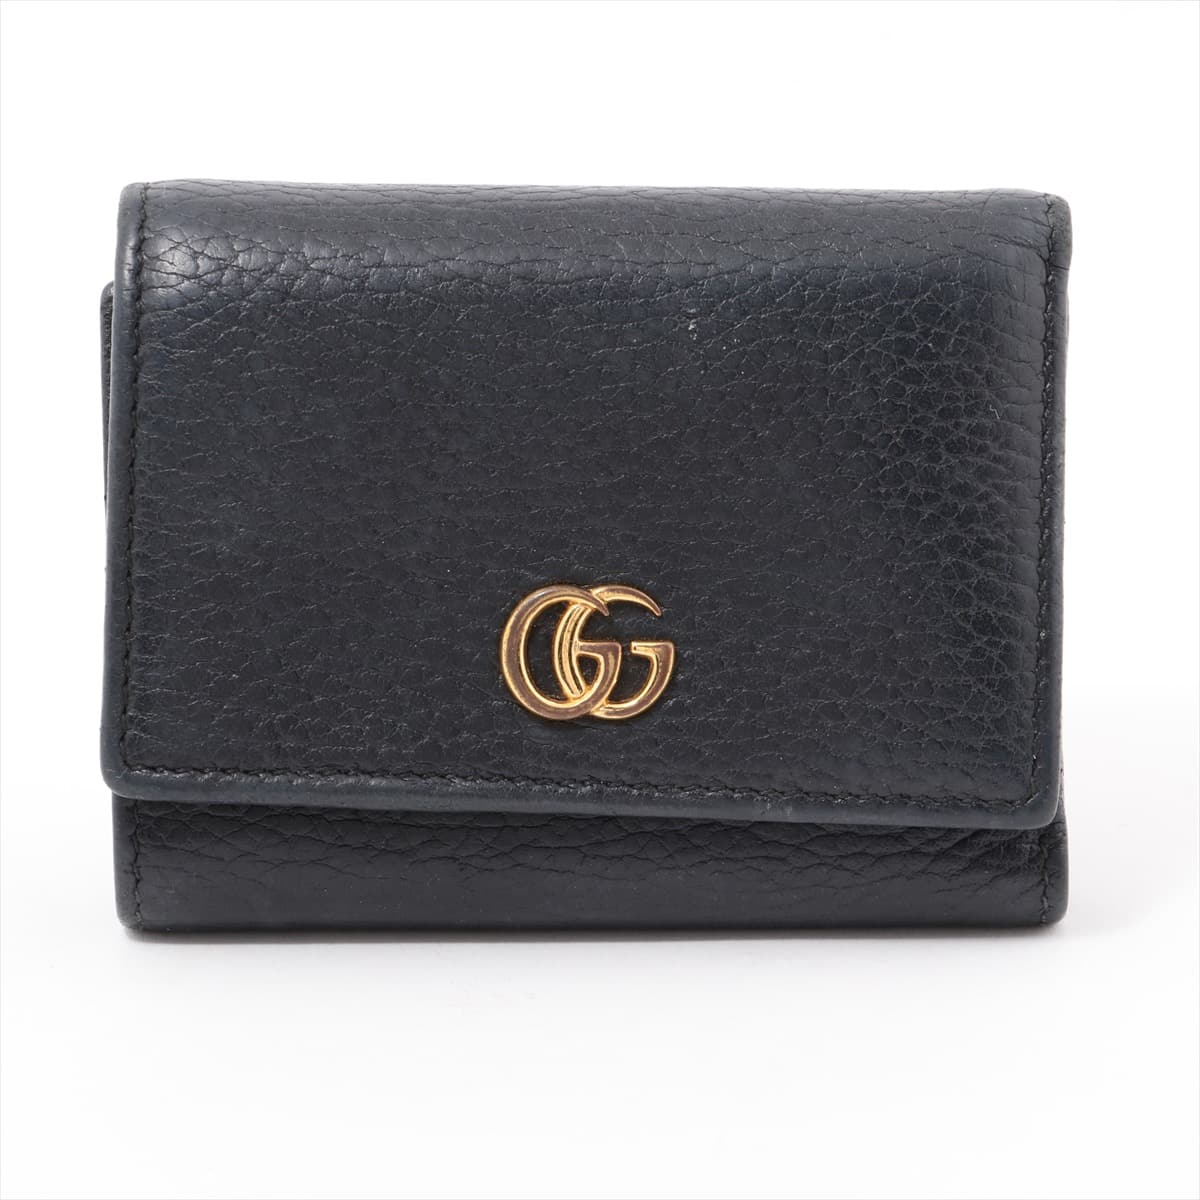 Gucci GG Marmont 474746 Leather Wallet Black